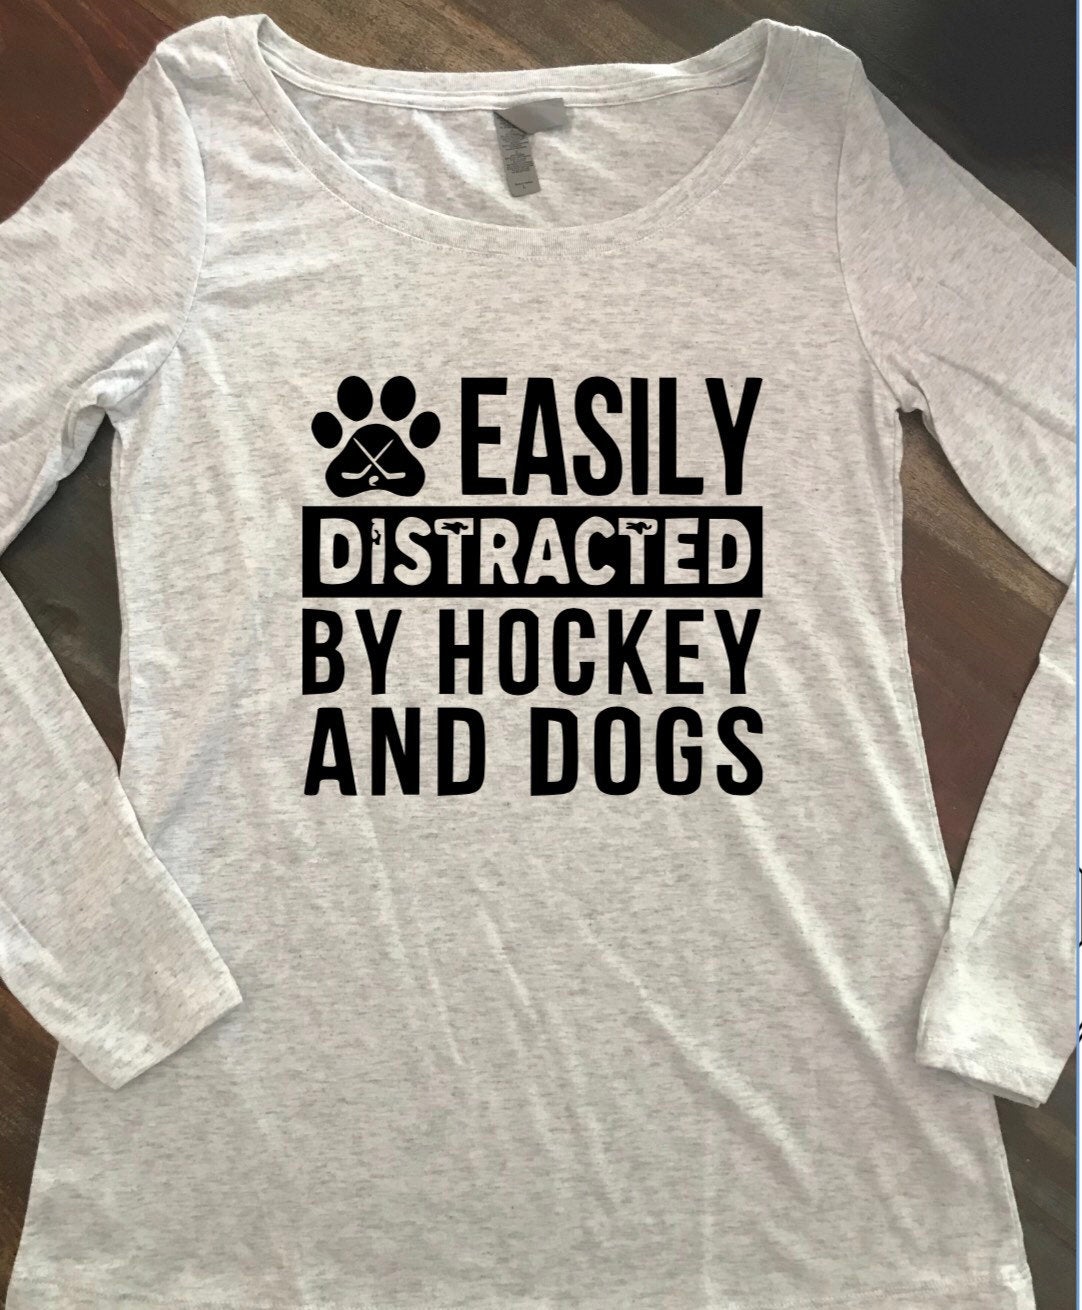 Distracted by Hockey and Dogs- Adult Unisex Long Sleeve T-Shirt